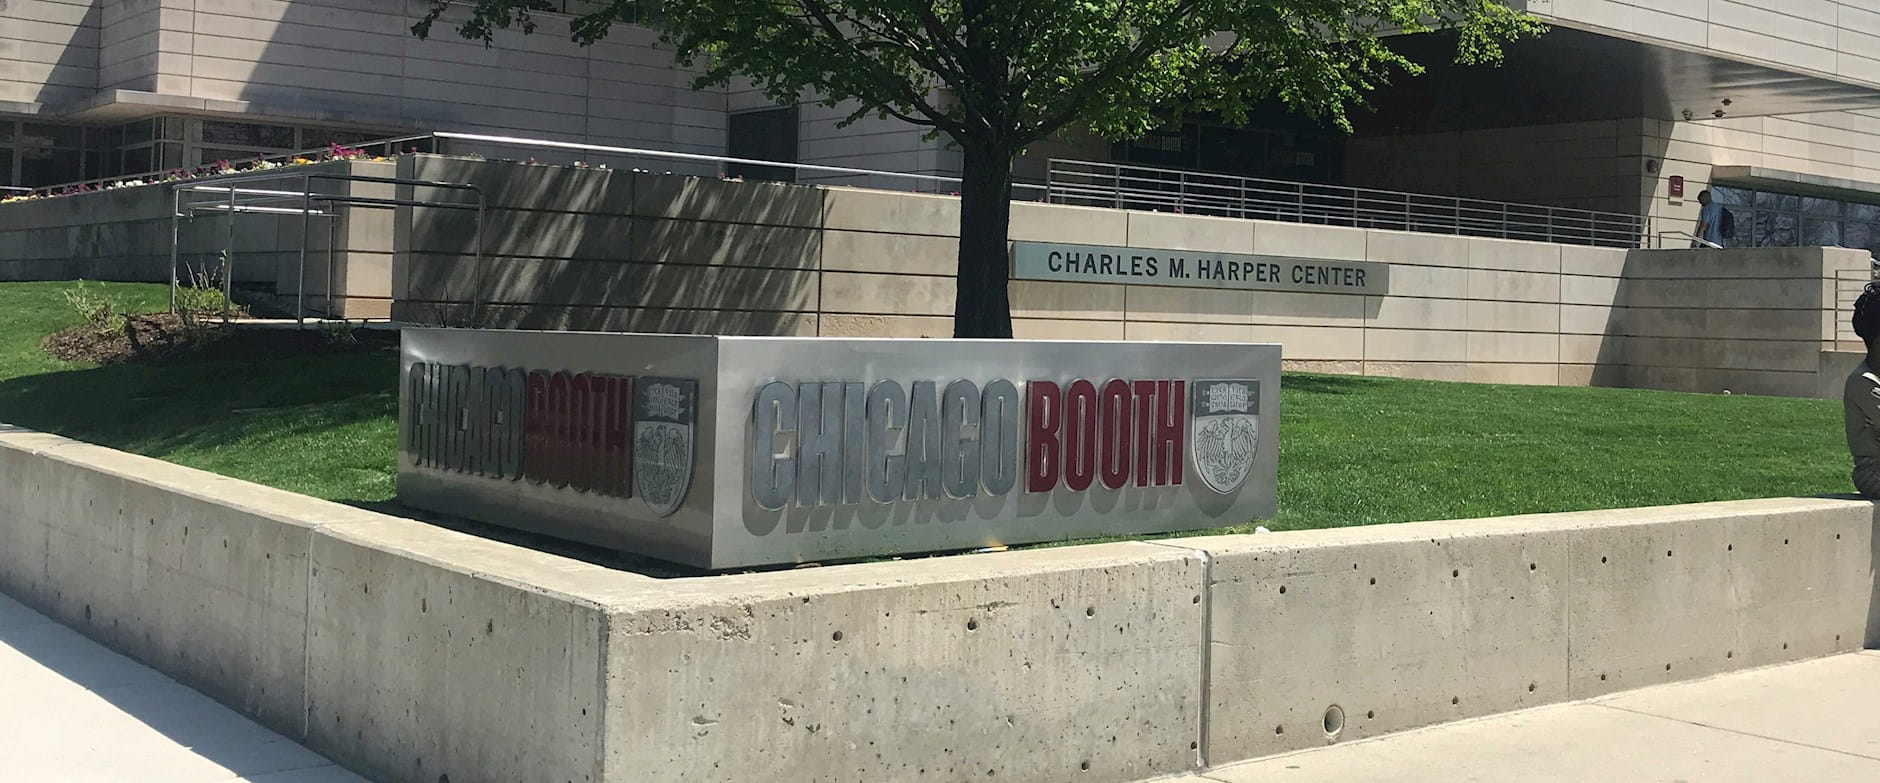 Three Misconceptions about the Chicago Booth School of Business